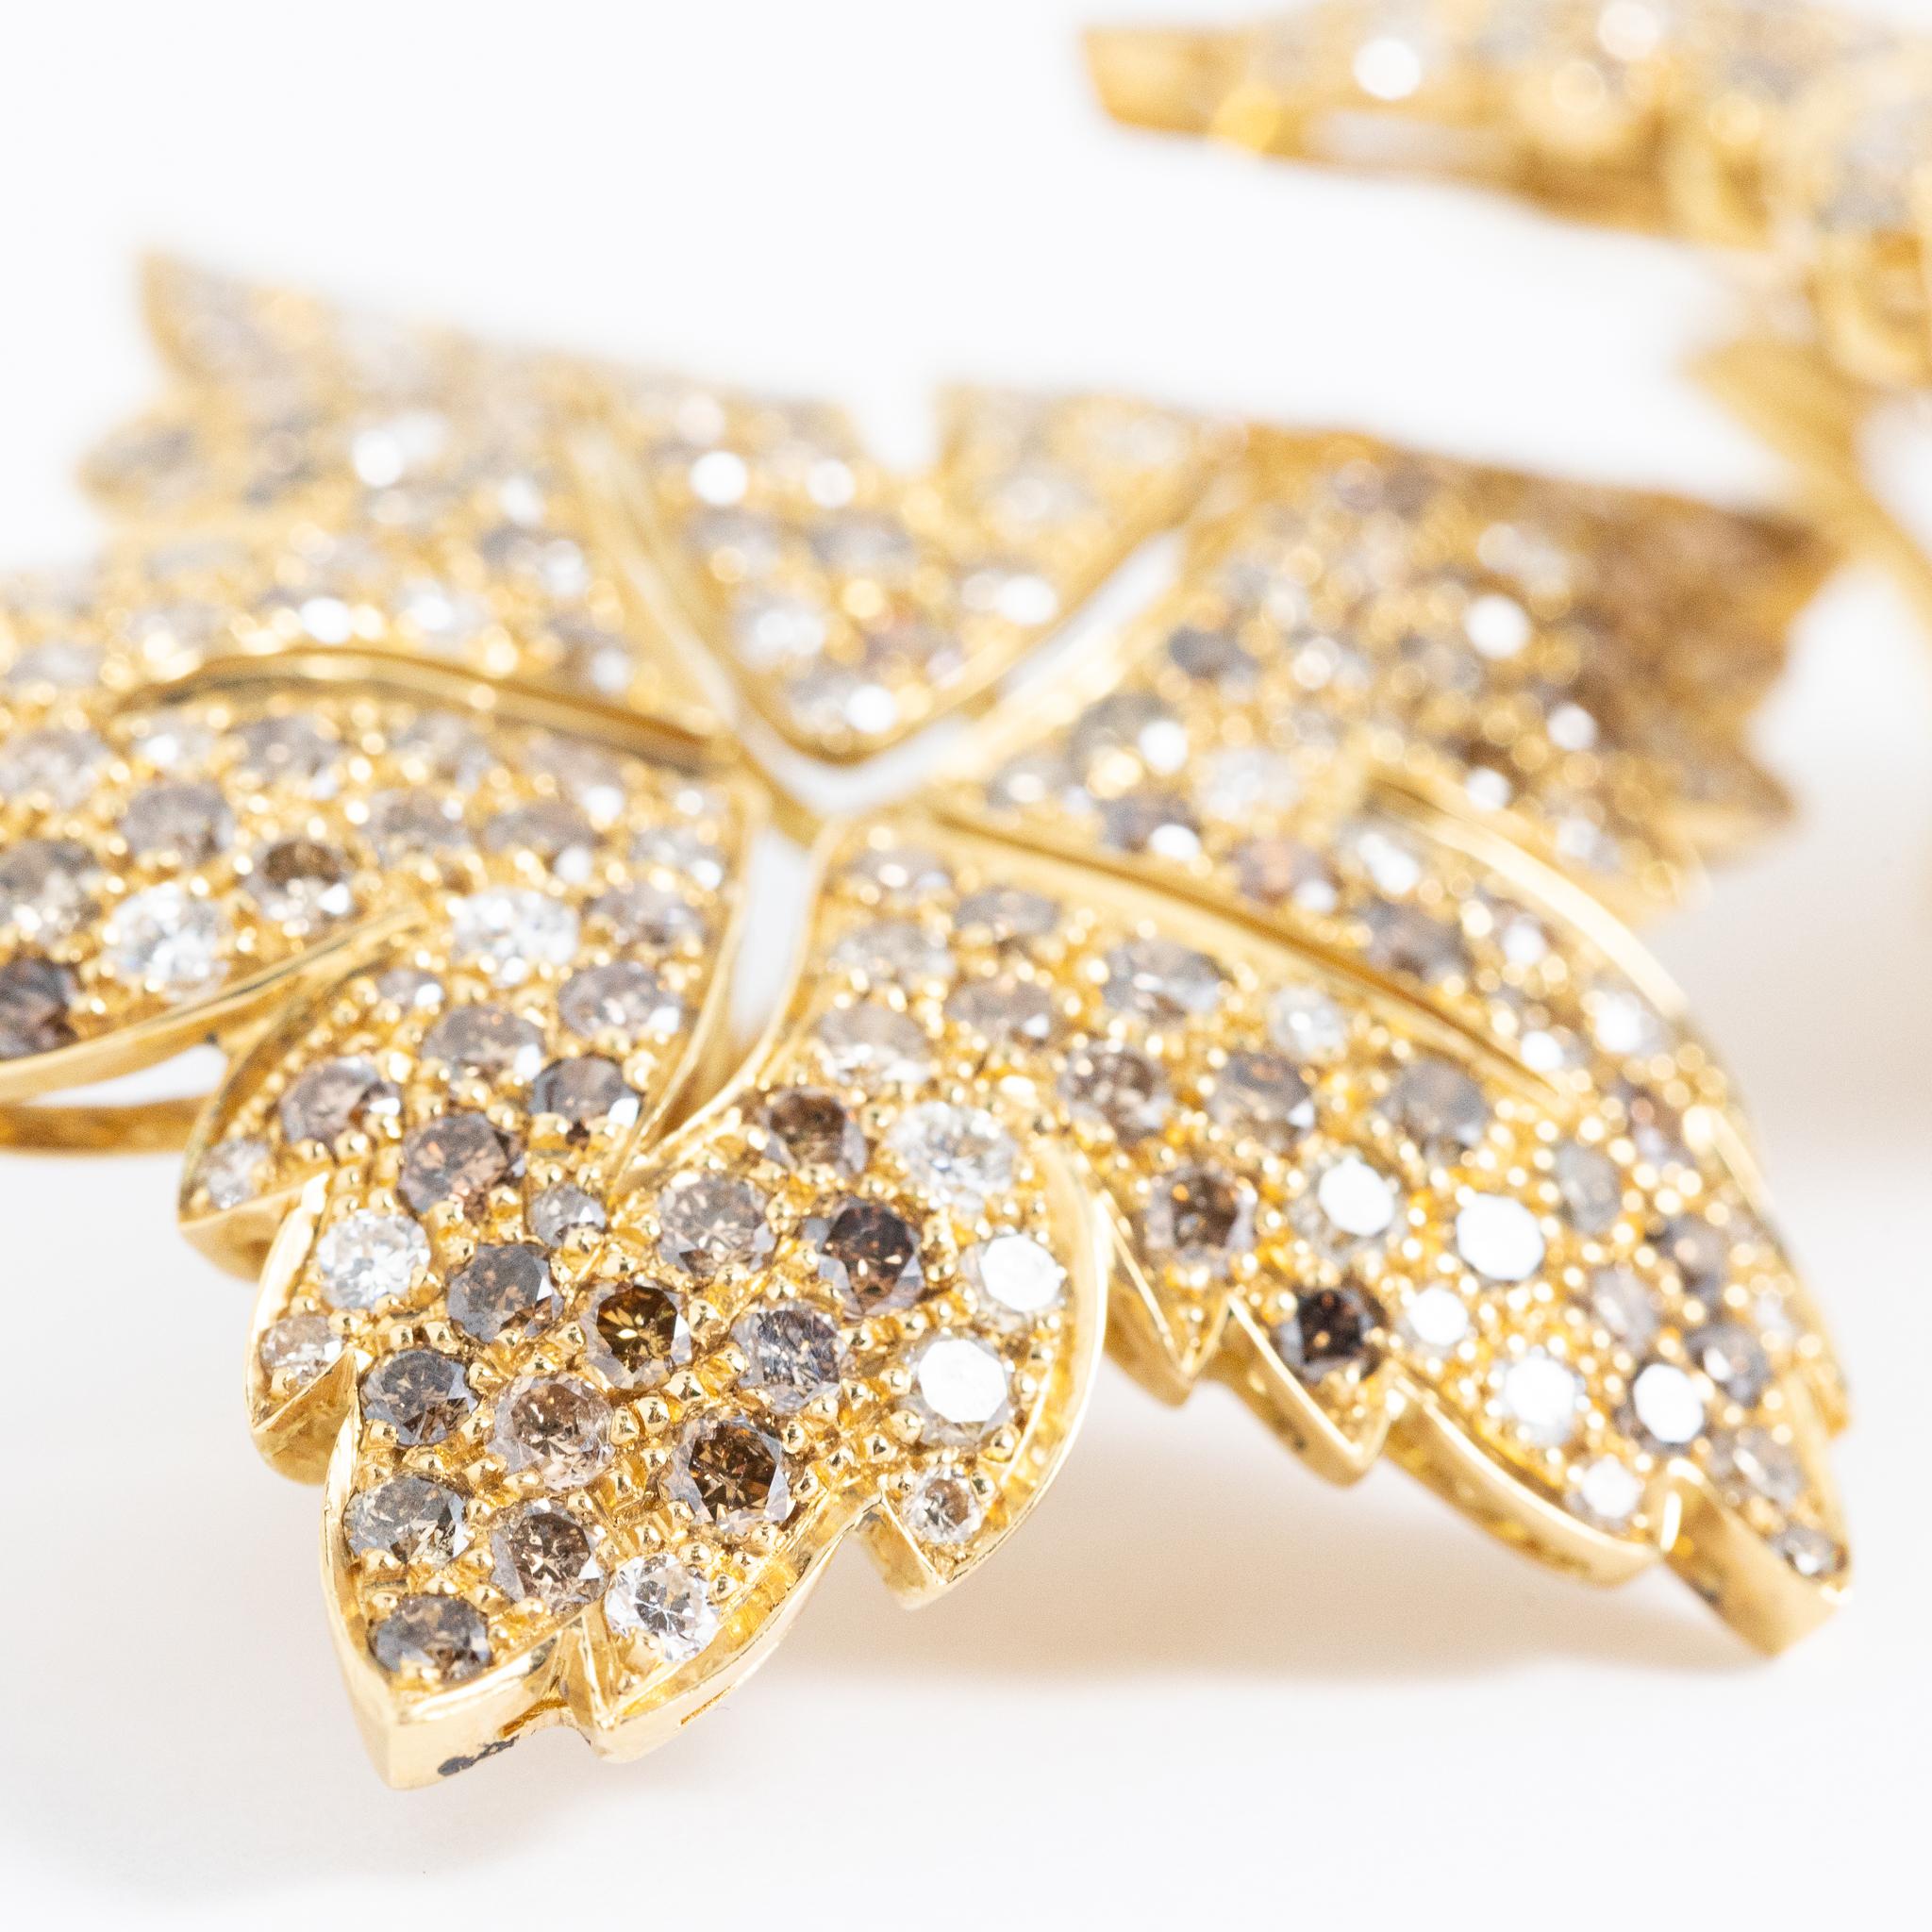 Handcrafted earrings made in Italy of 18 kt. yellow gold with white and brown brilliant-cut diamonds.
This piece belongs to Fraleoni's Dolcevita collection.
The earrings are designed as a leaf, and the alternation of diamonds of different colors